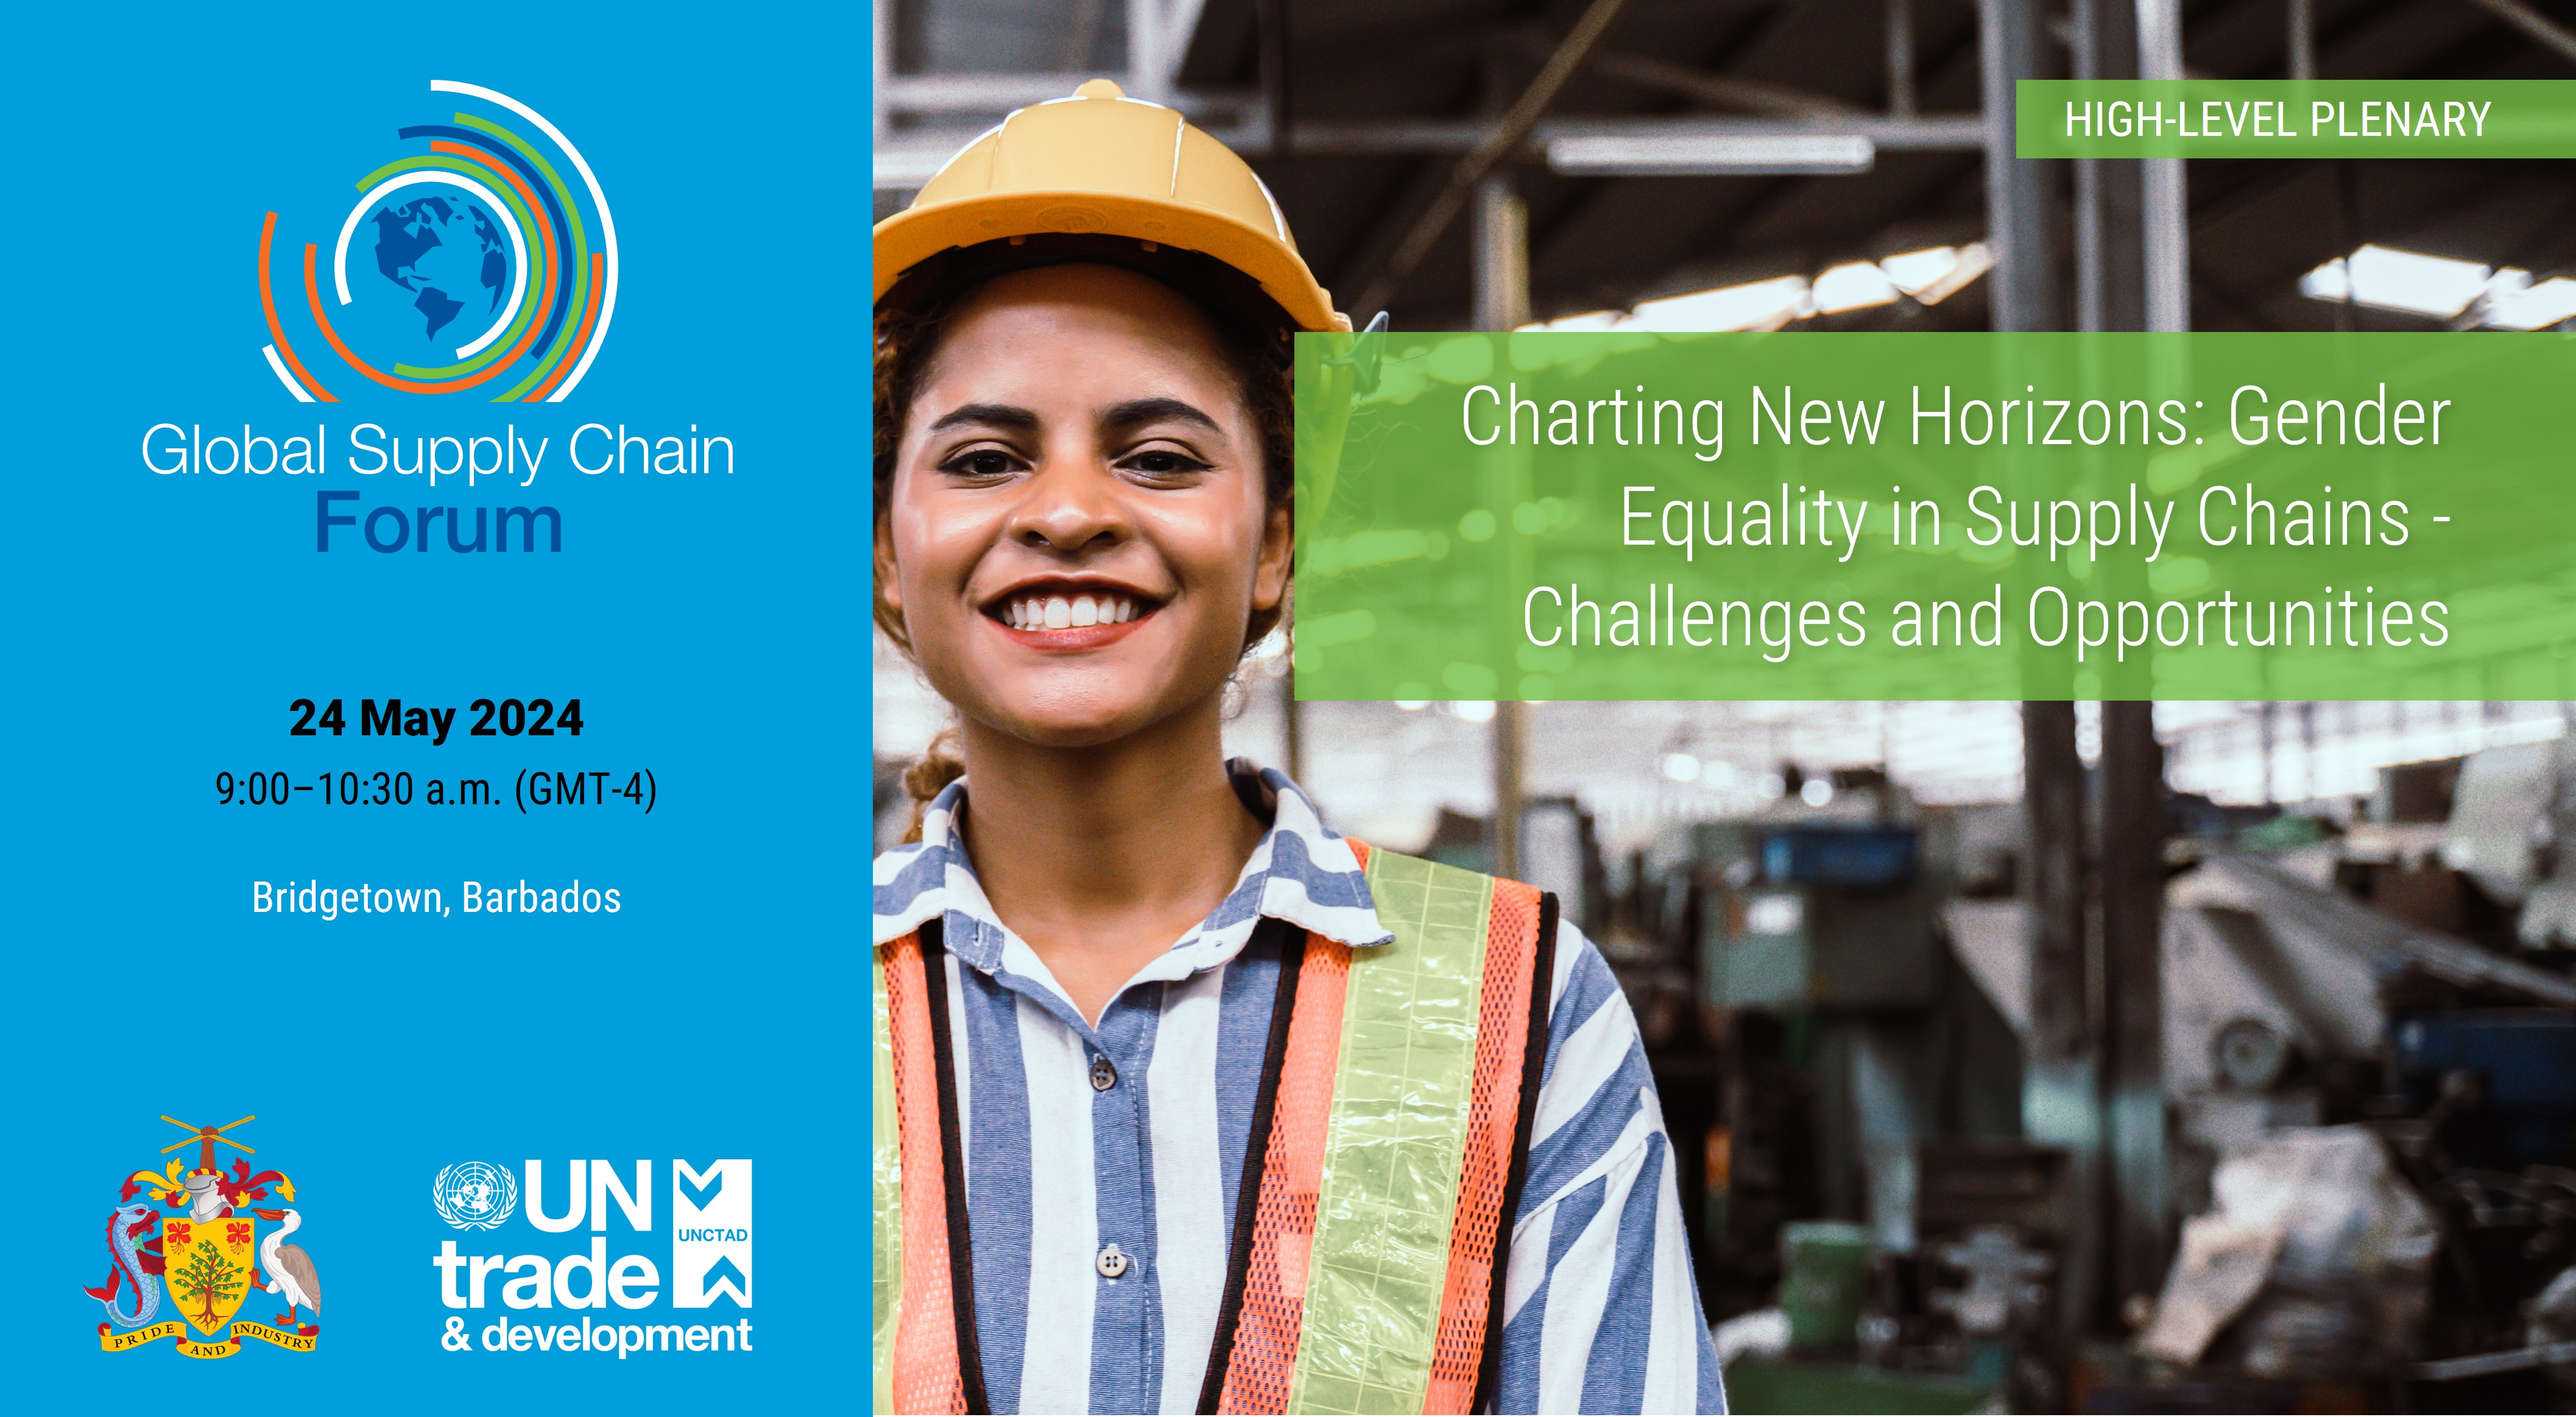 Charting a new path: Gender Equality in Supply Chains - Challenges and Opportunities